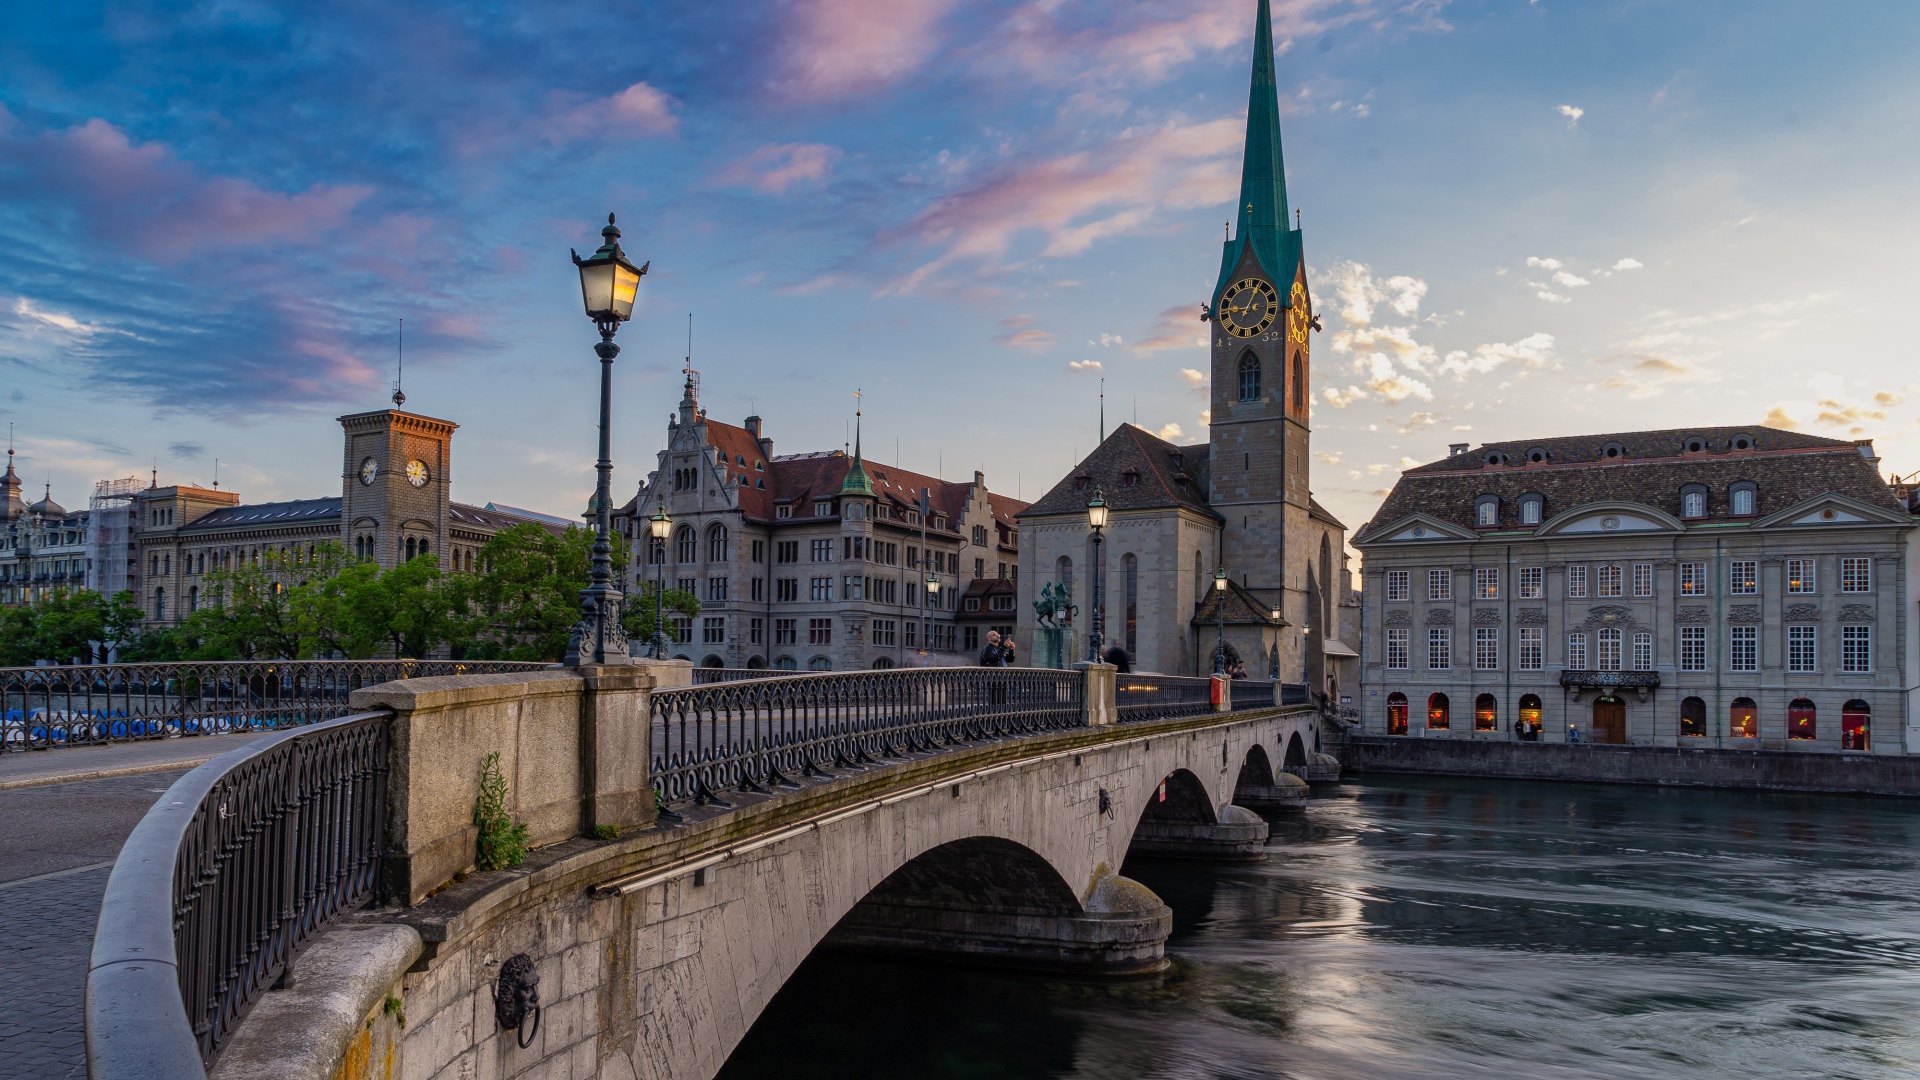 Beautiful buildings and a bridge over the river in the city of Zurich, Switzerland